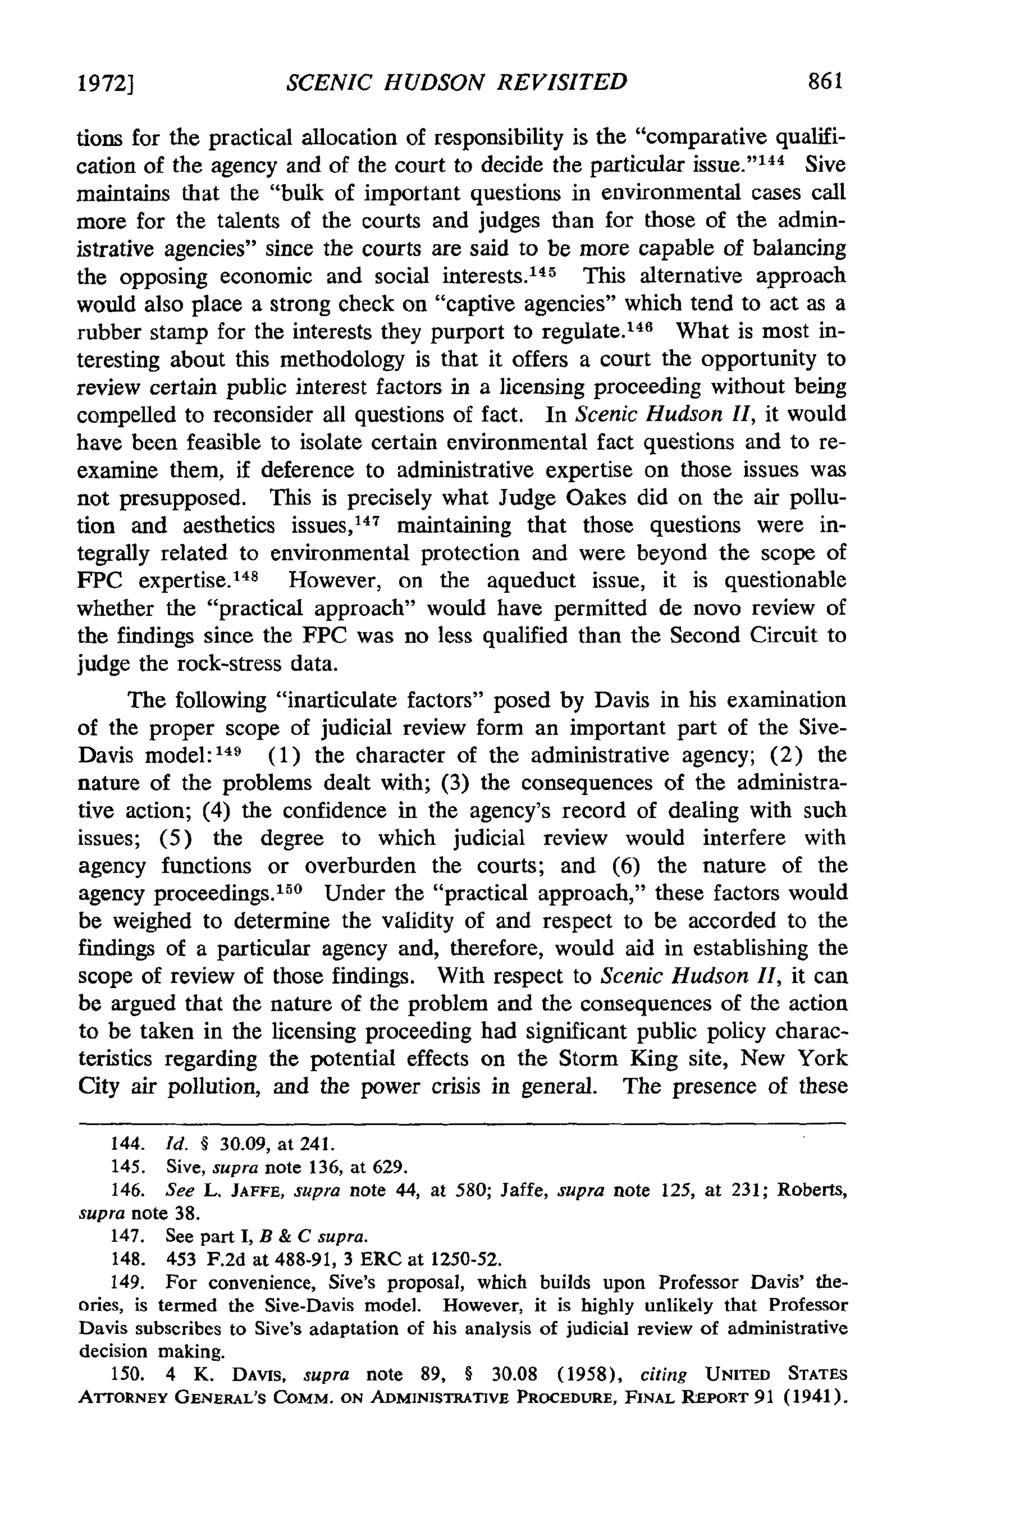 19721 SCENIC HUDSON REVISITED tions for the practical allocation of responsibility is the "comparative qualification of the agency and of the court to decide the particular issue.